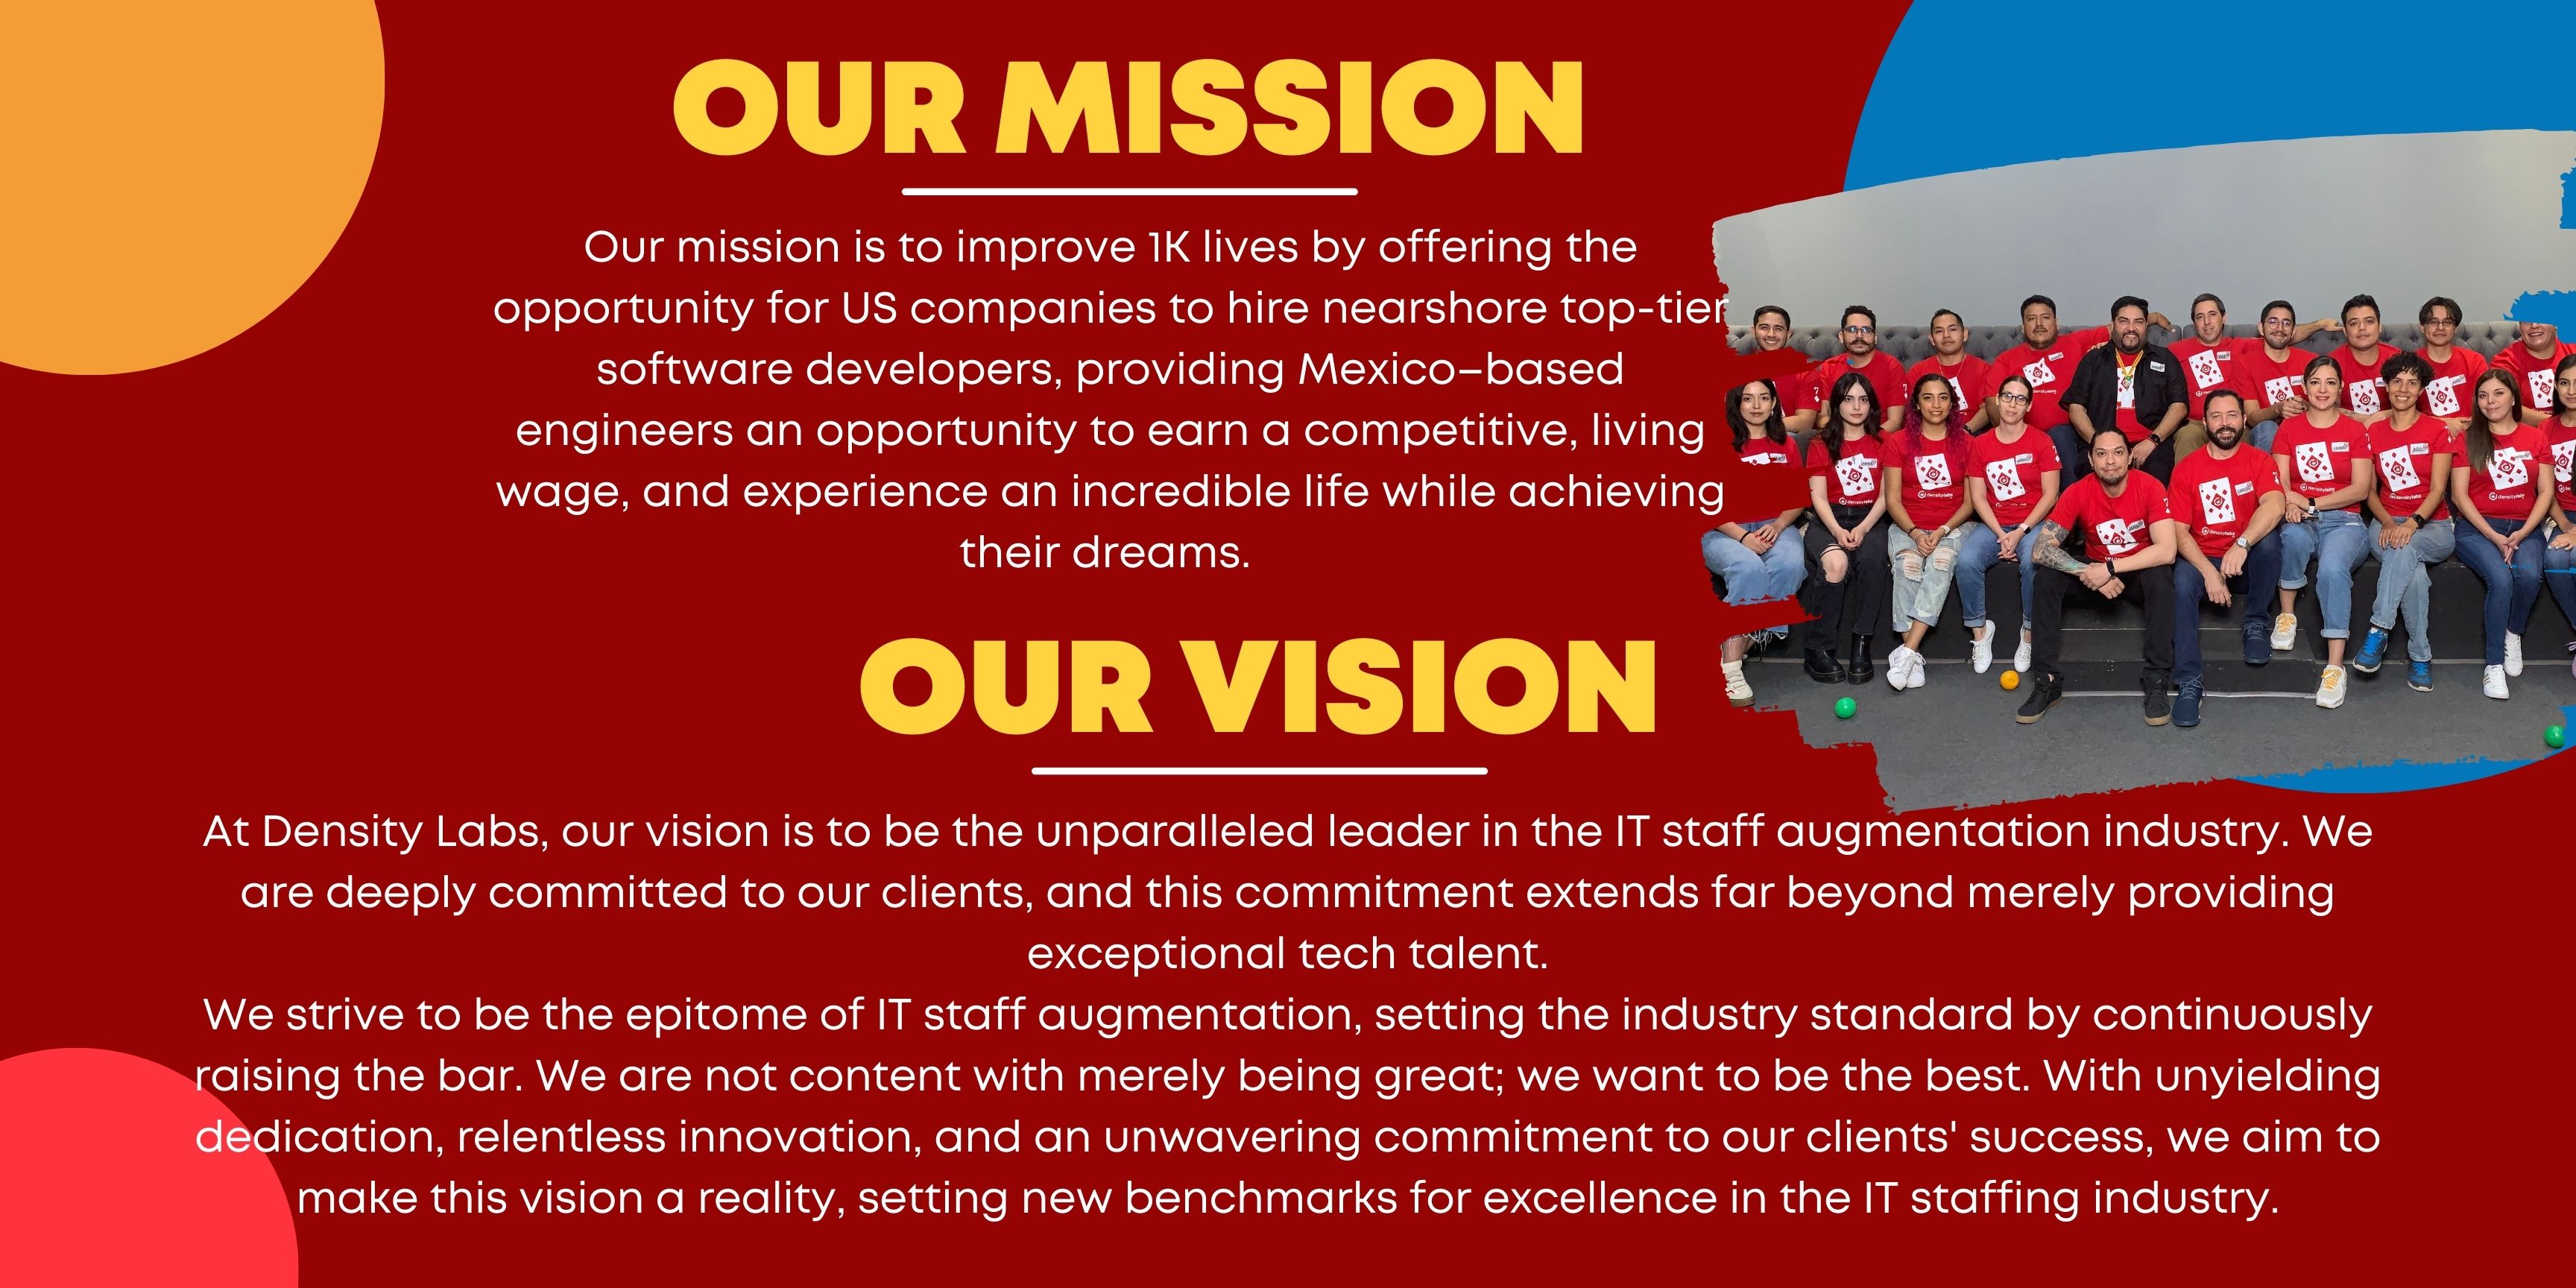 OUR MISSION AND OUR VISION